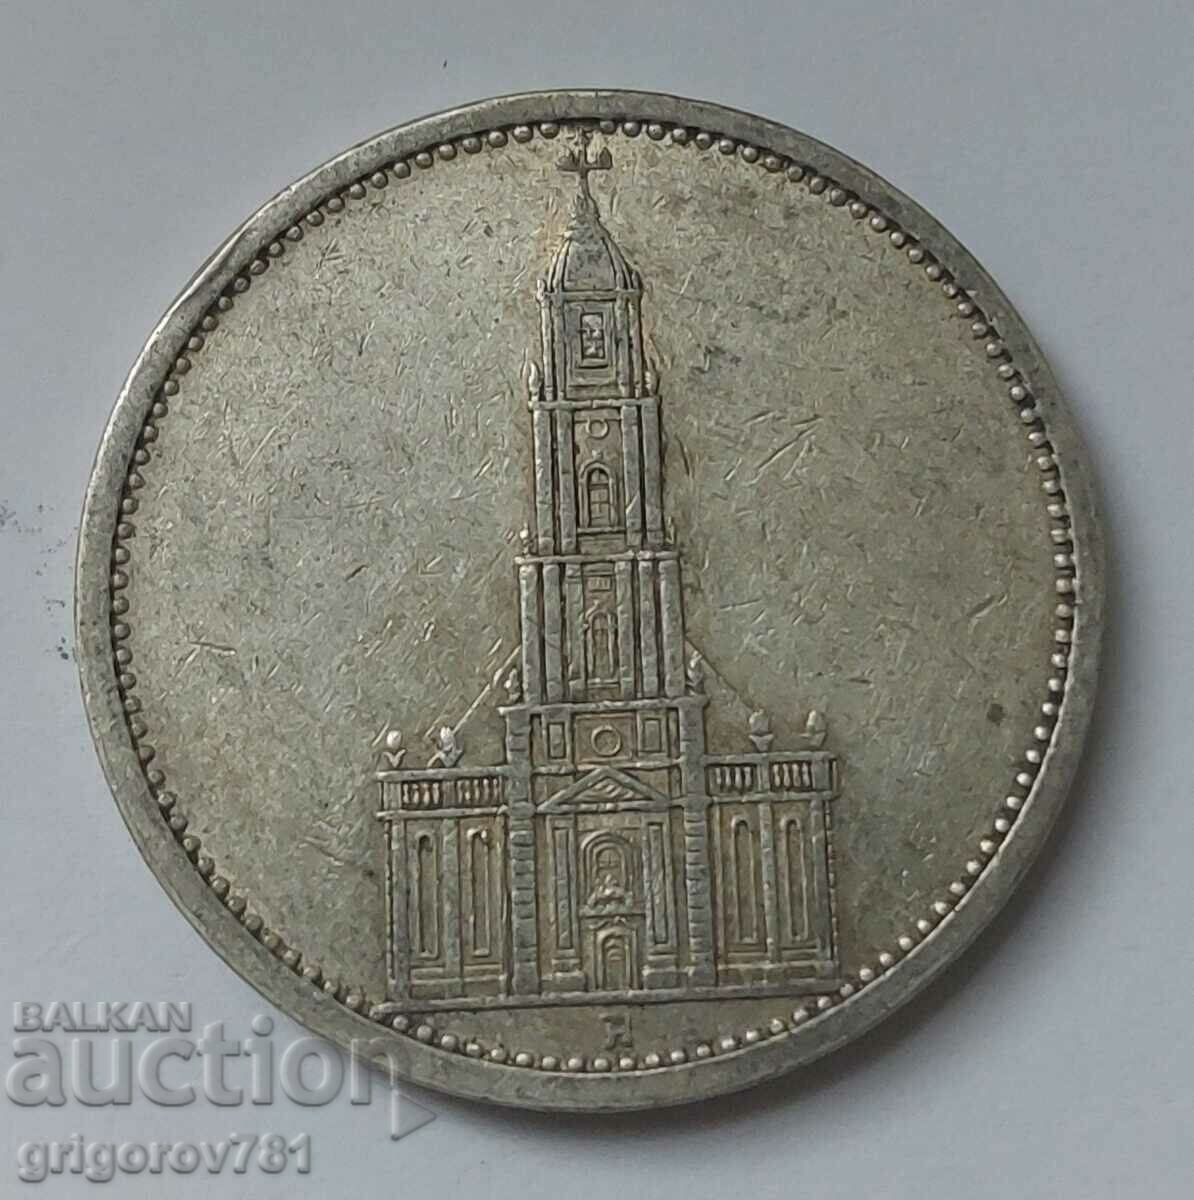 5 Mark Silver Germany 1935 A III Reich Silver Coin #21